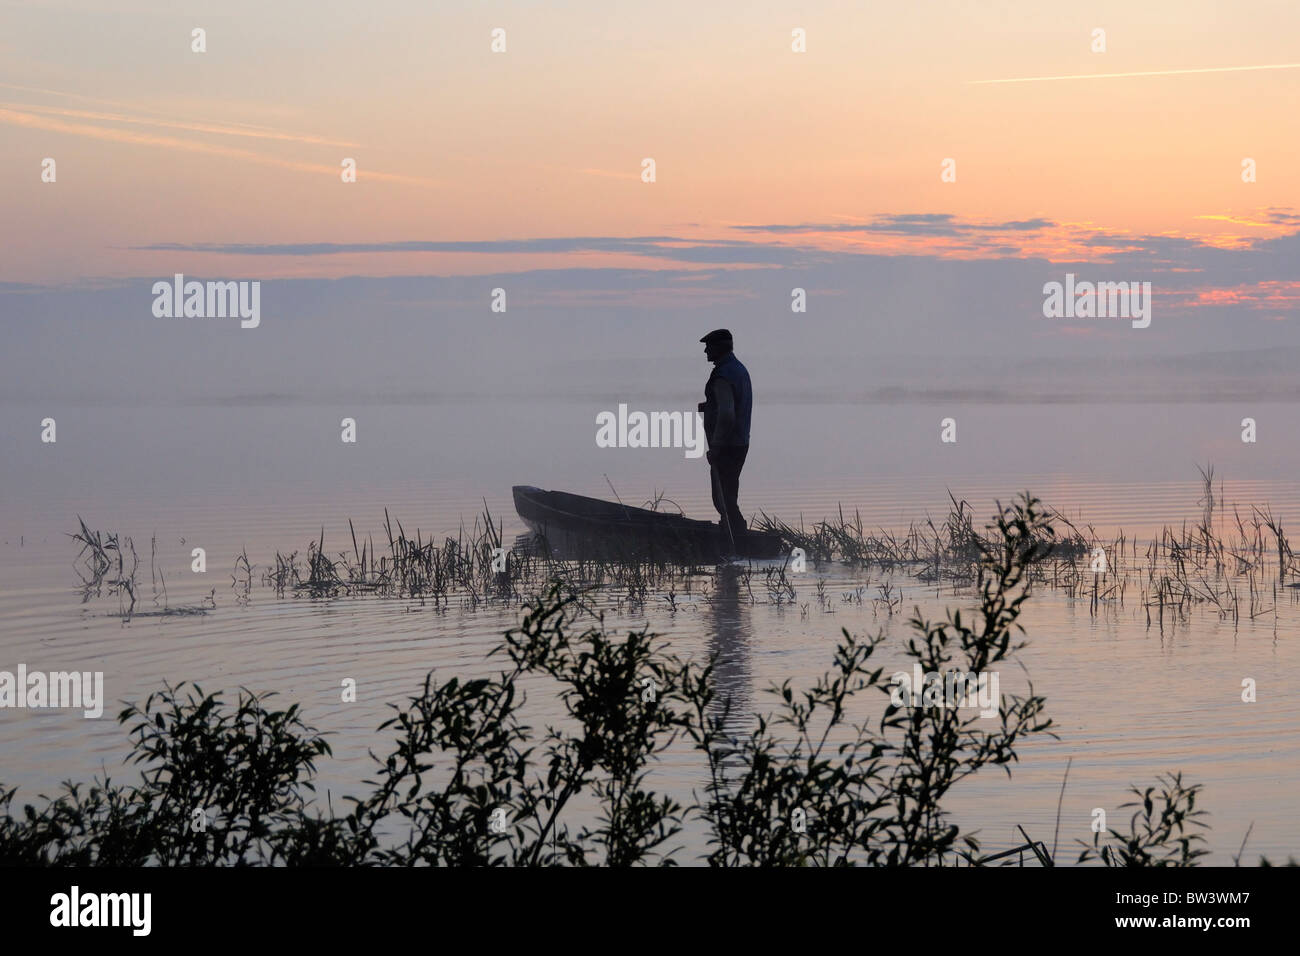 Angler heading out to fish on traditional punt at dawn, Biebrza marsh, Poland, May 2008. Stock Photo